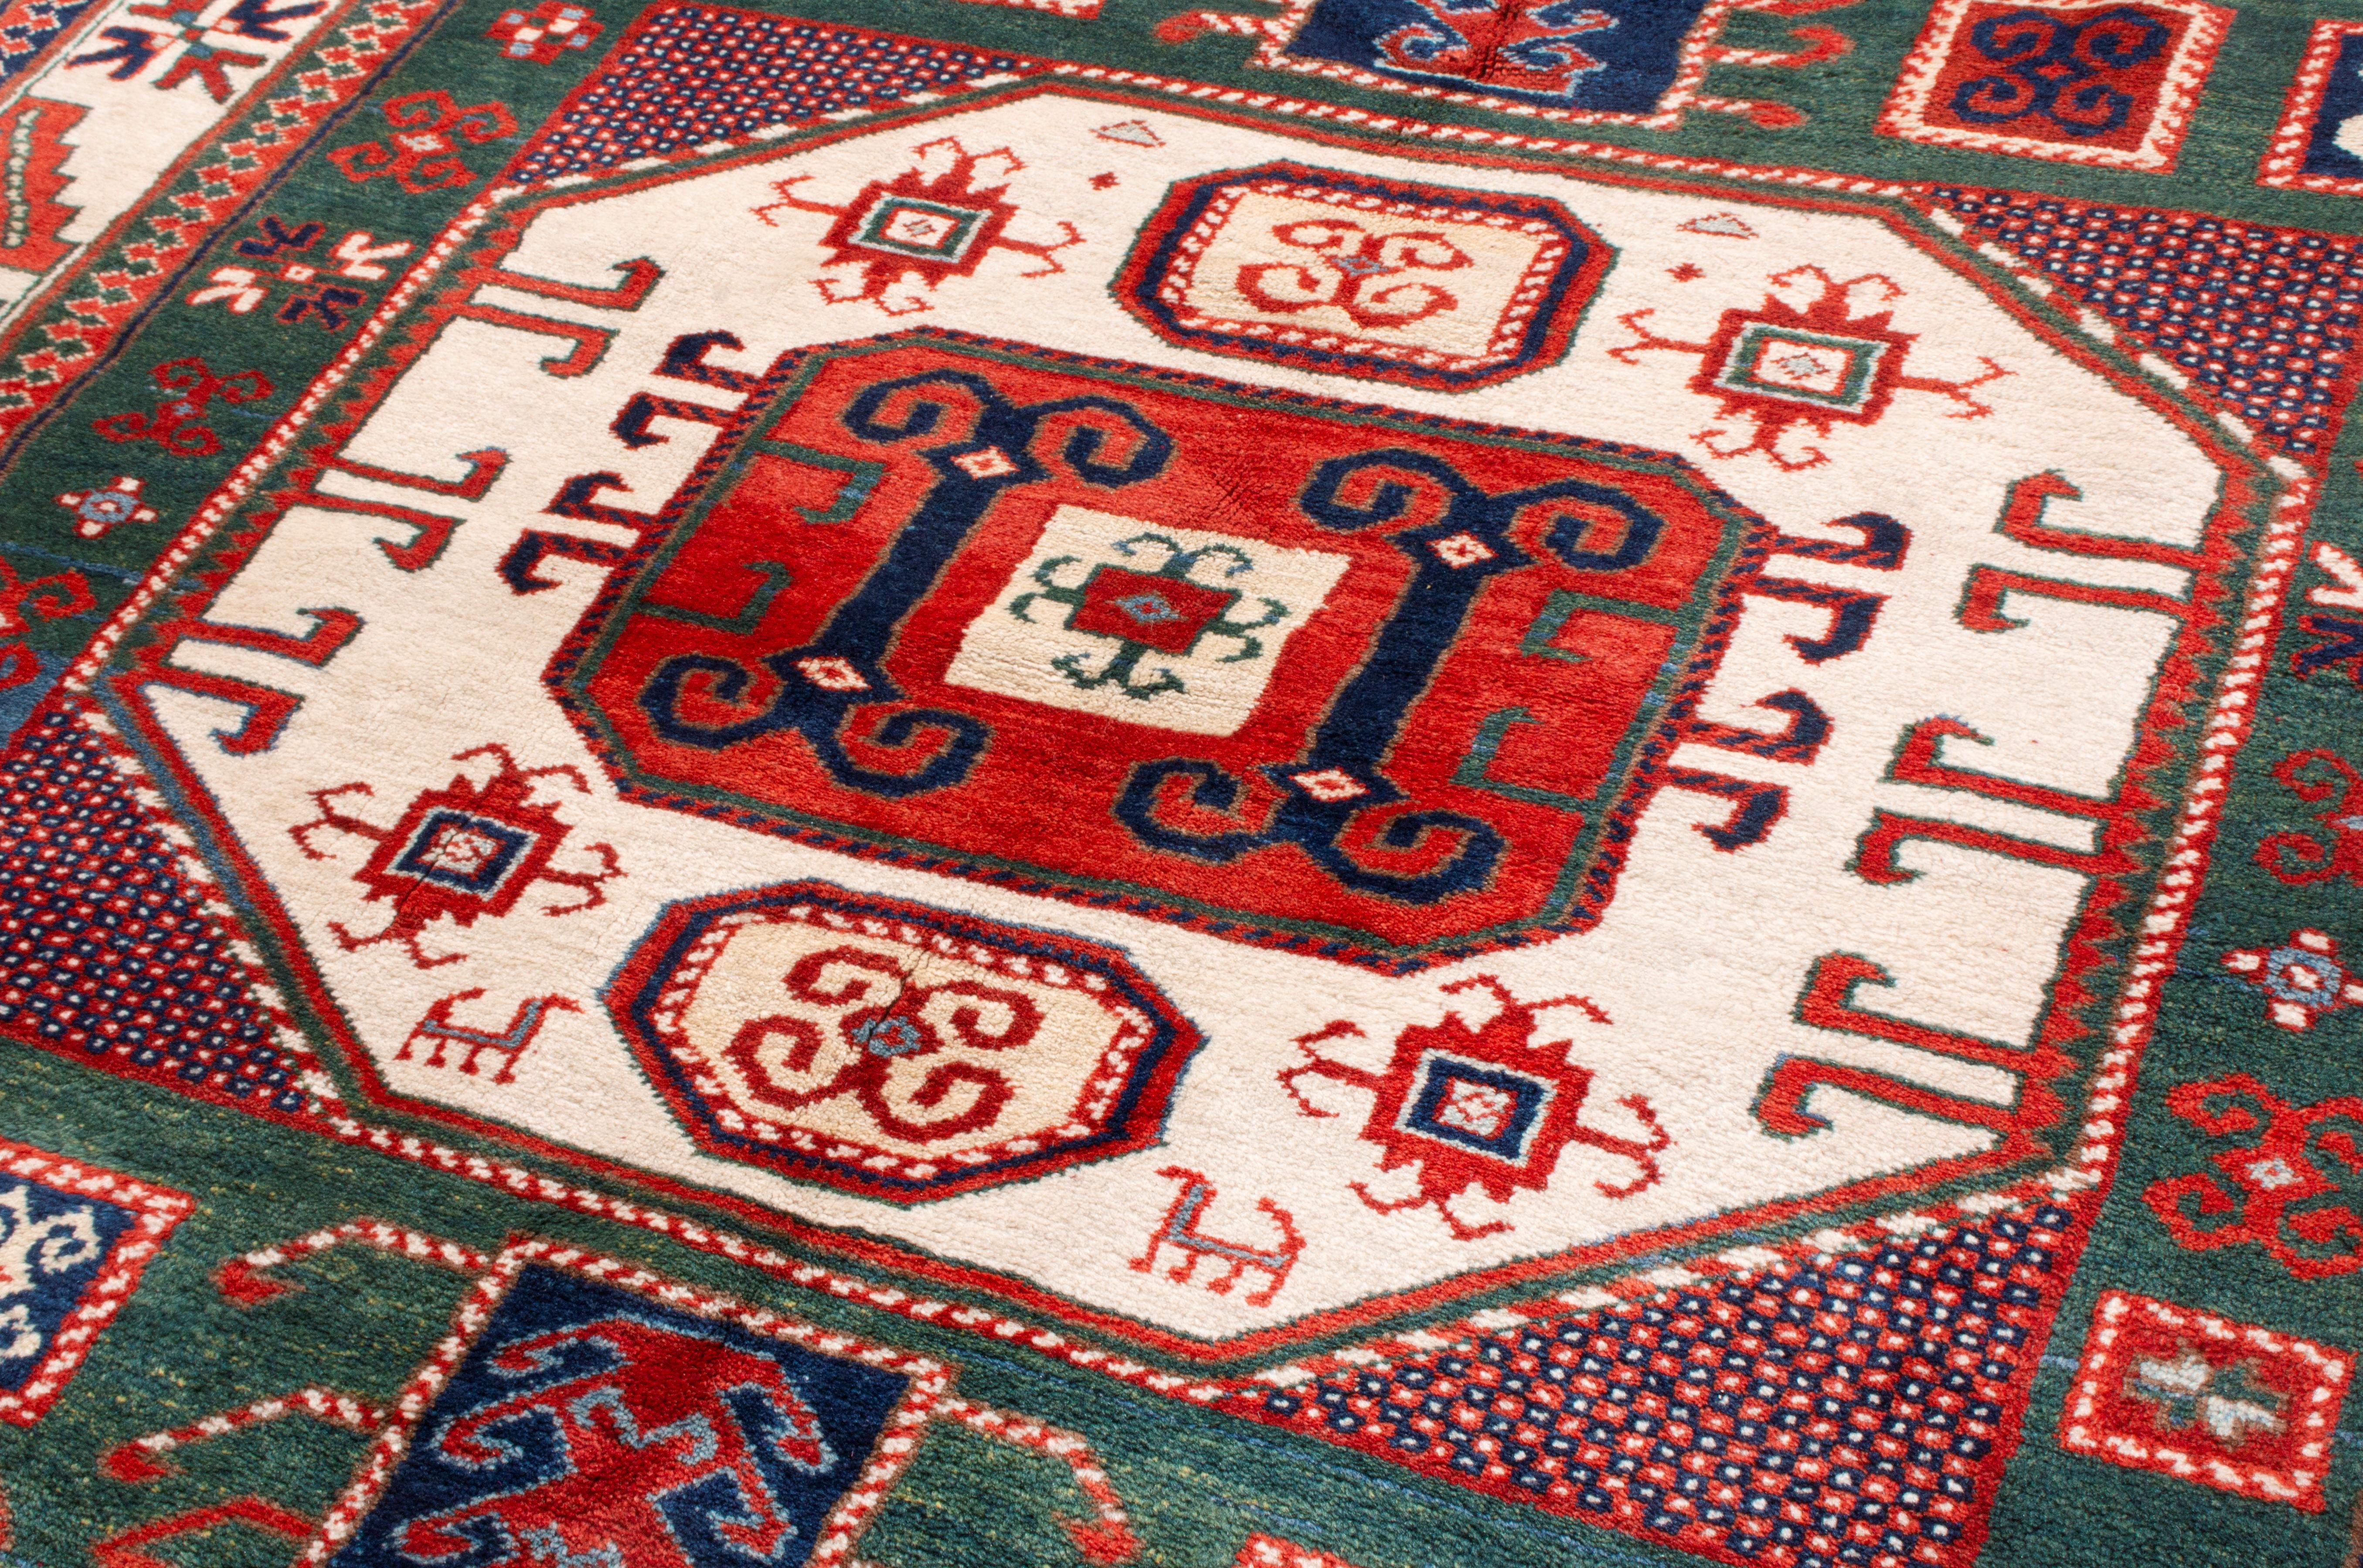 Hand-Knotted New Kazak Transitional Red and Green Wool Rug with Ram Horn Motifs